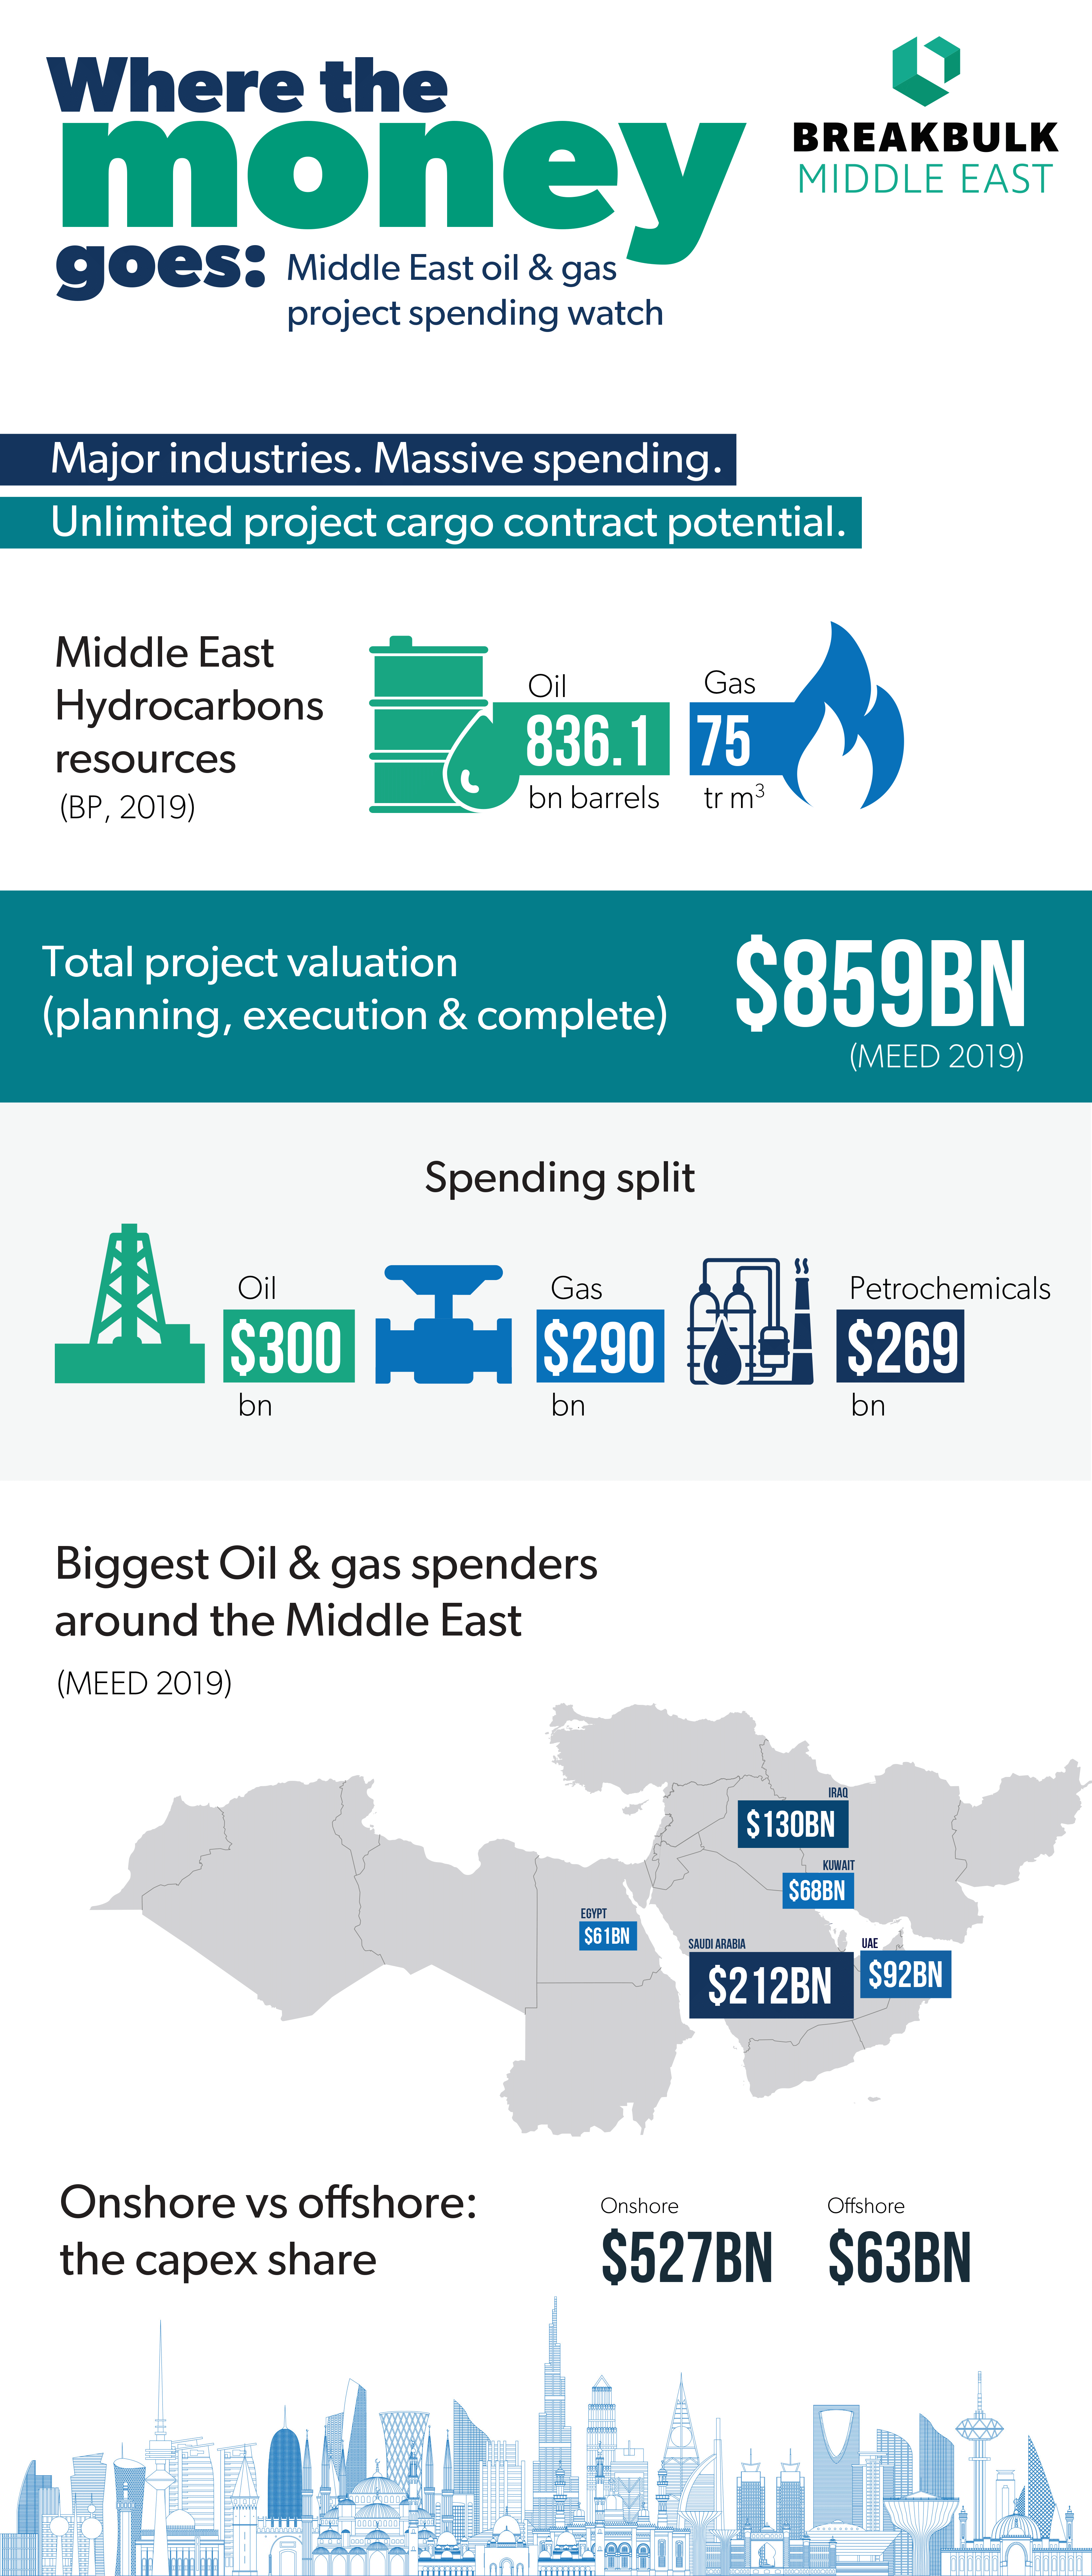 Where the money goes - Middle East oil & gas spending watch